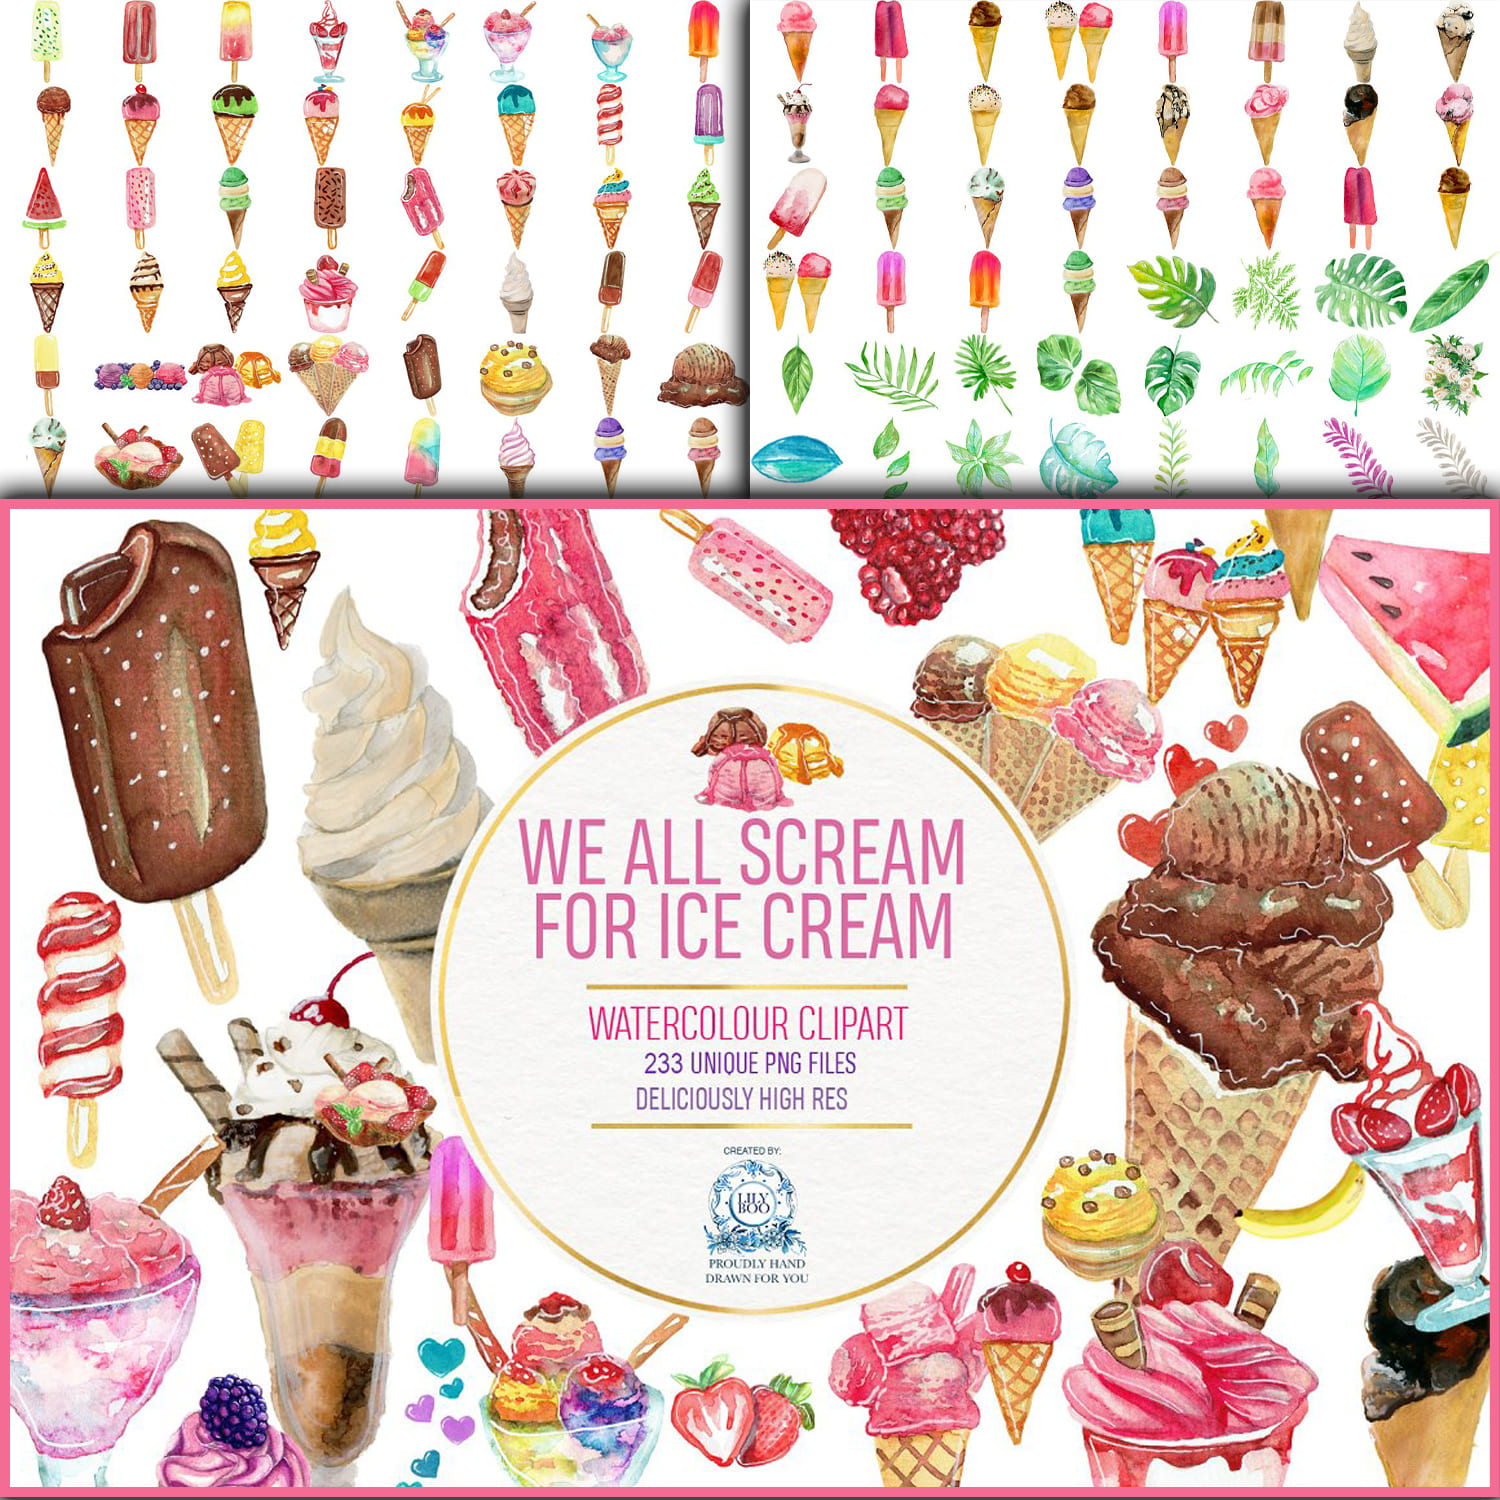 Ice Cream Watercolor Clipart 223 PNG cover.